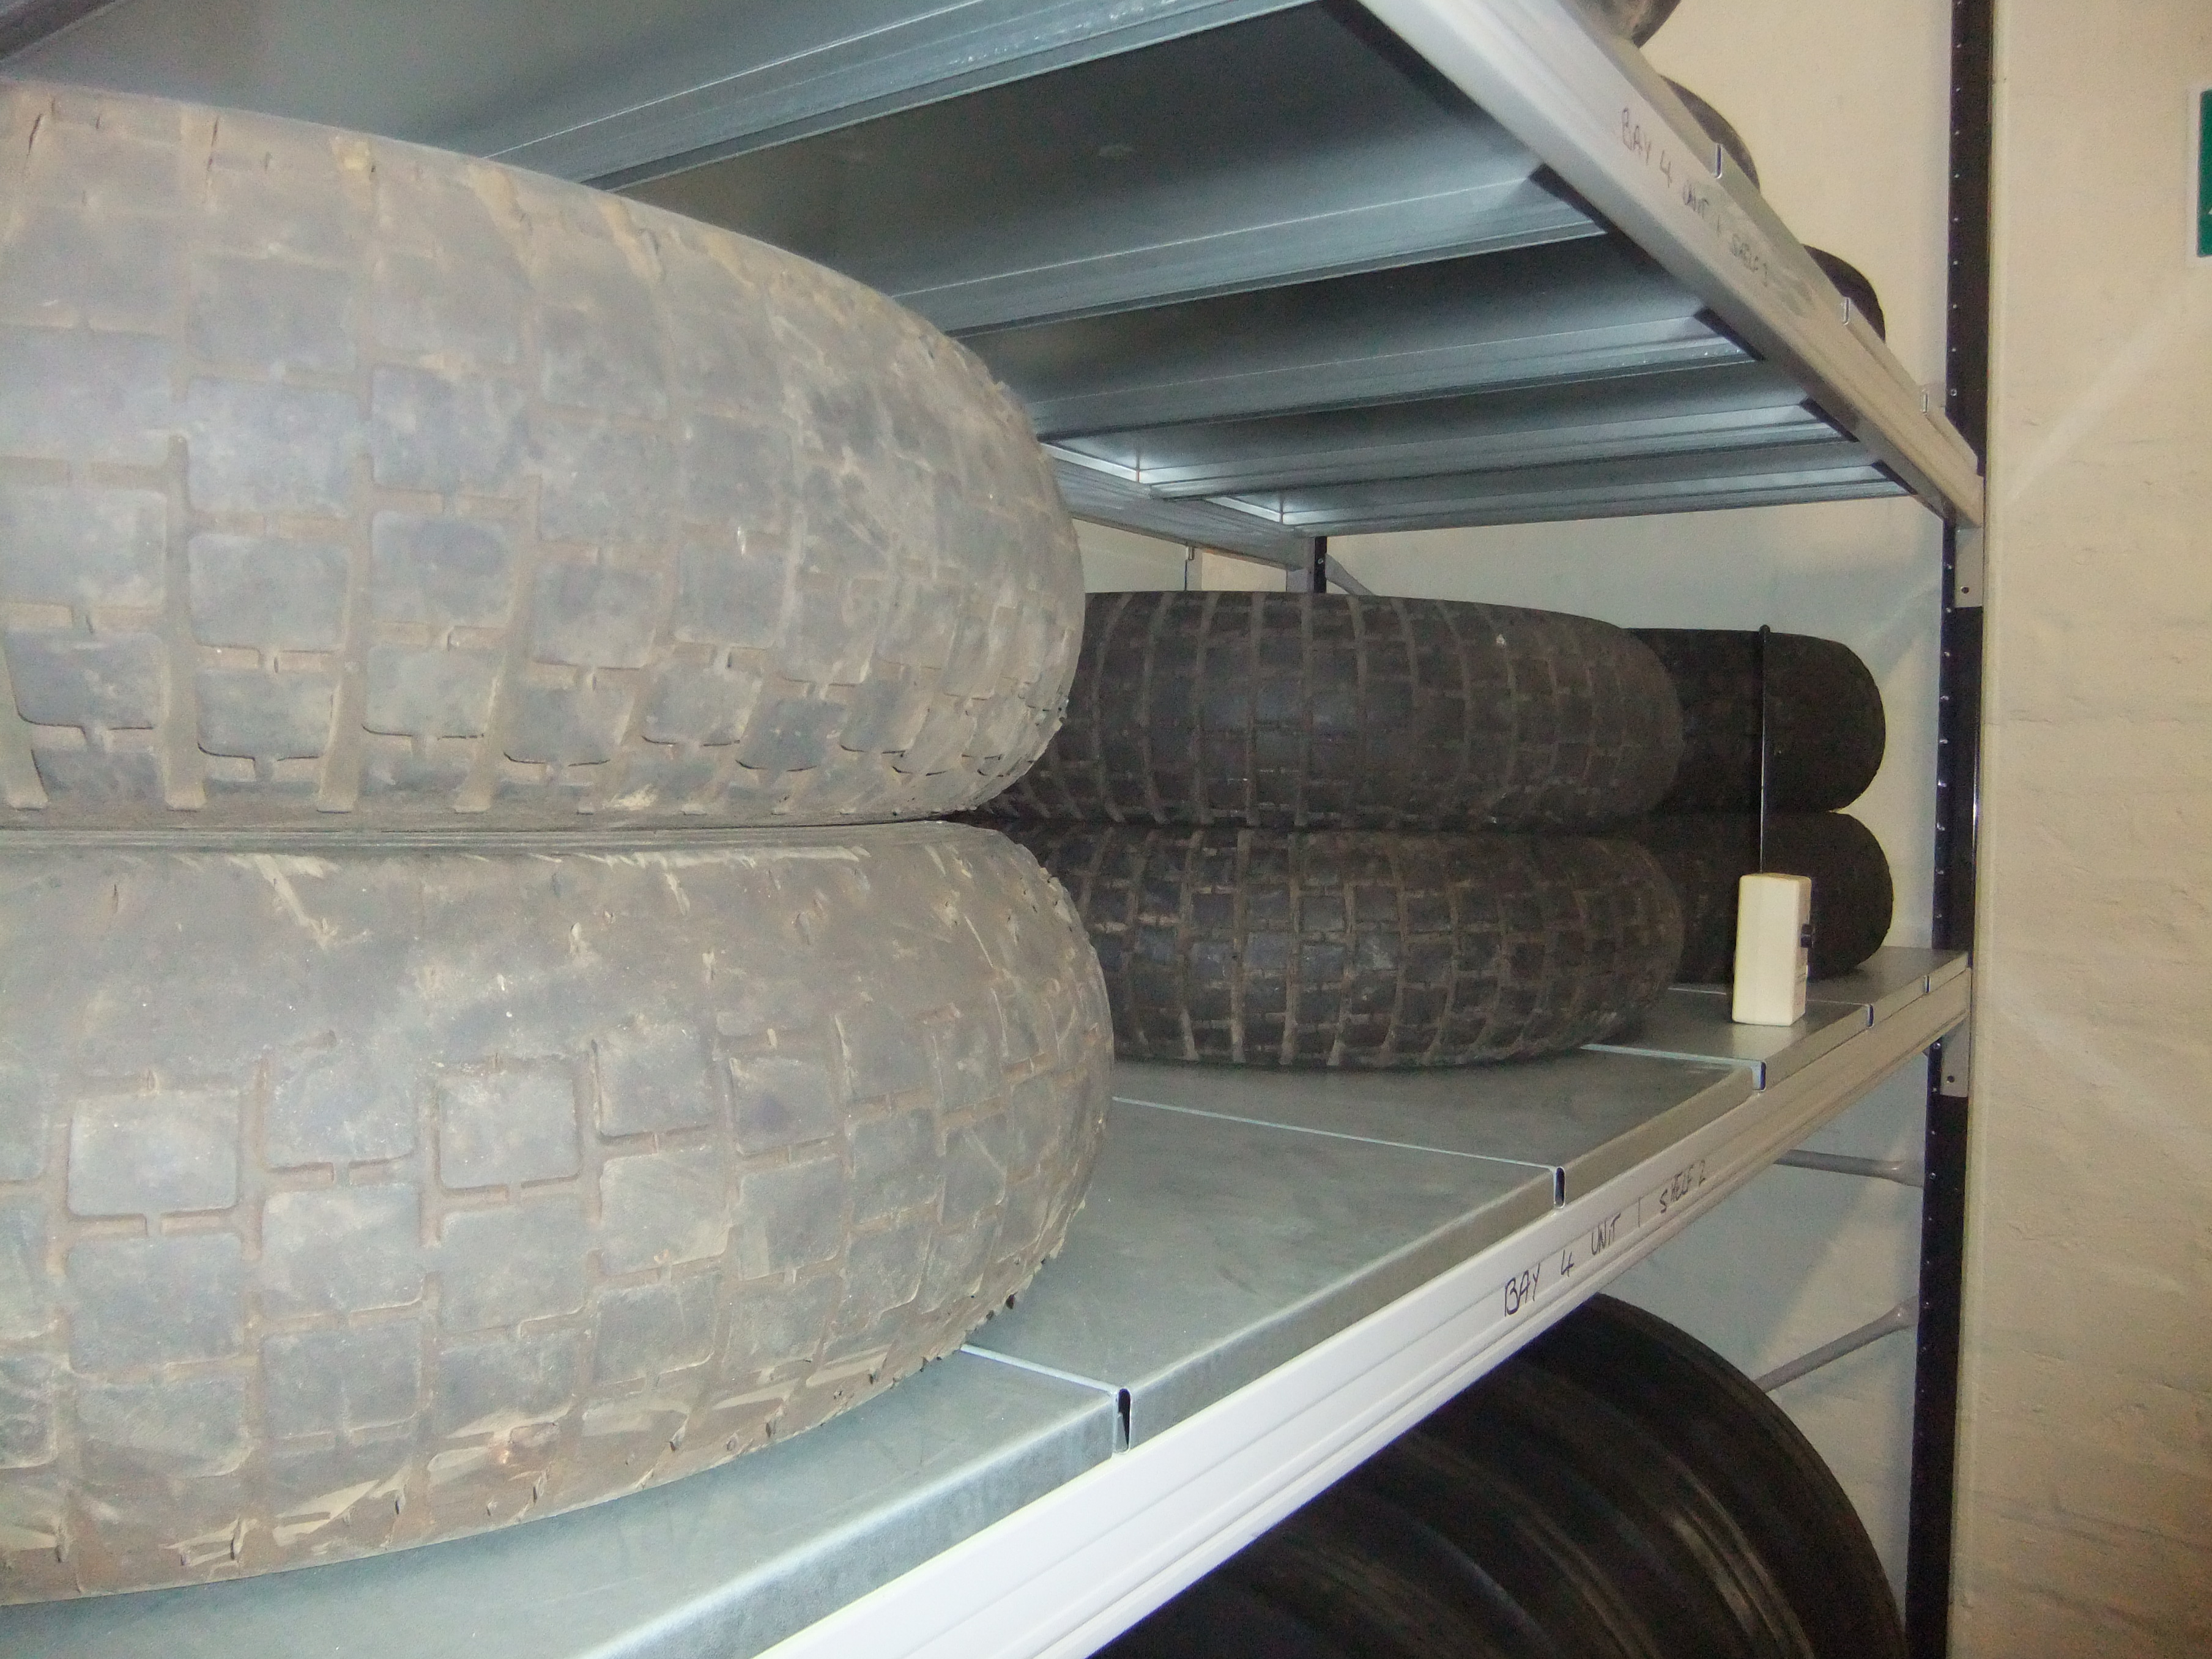 Aircraft tyres in the 'rubber room' at National Museum of Flight